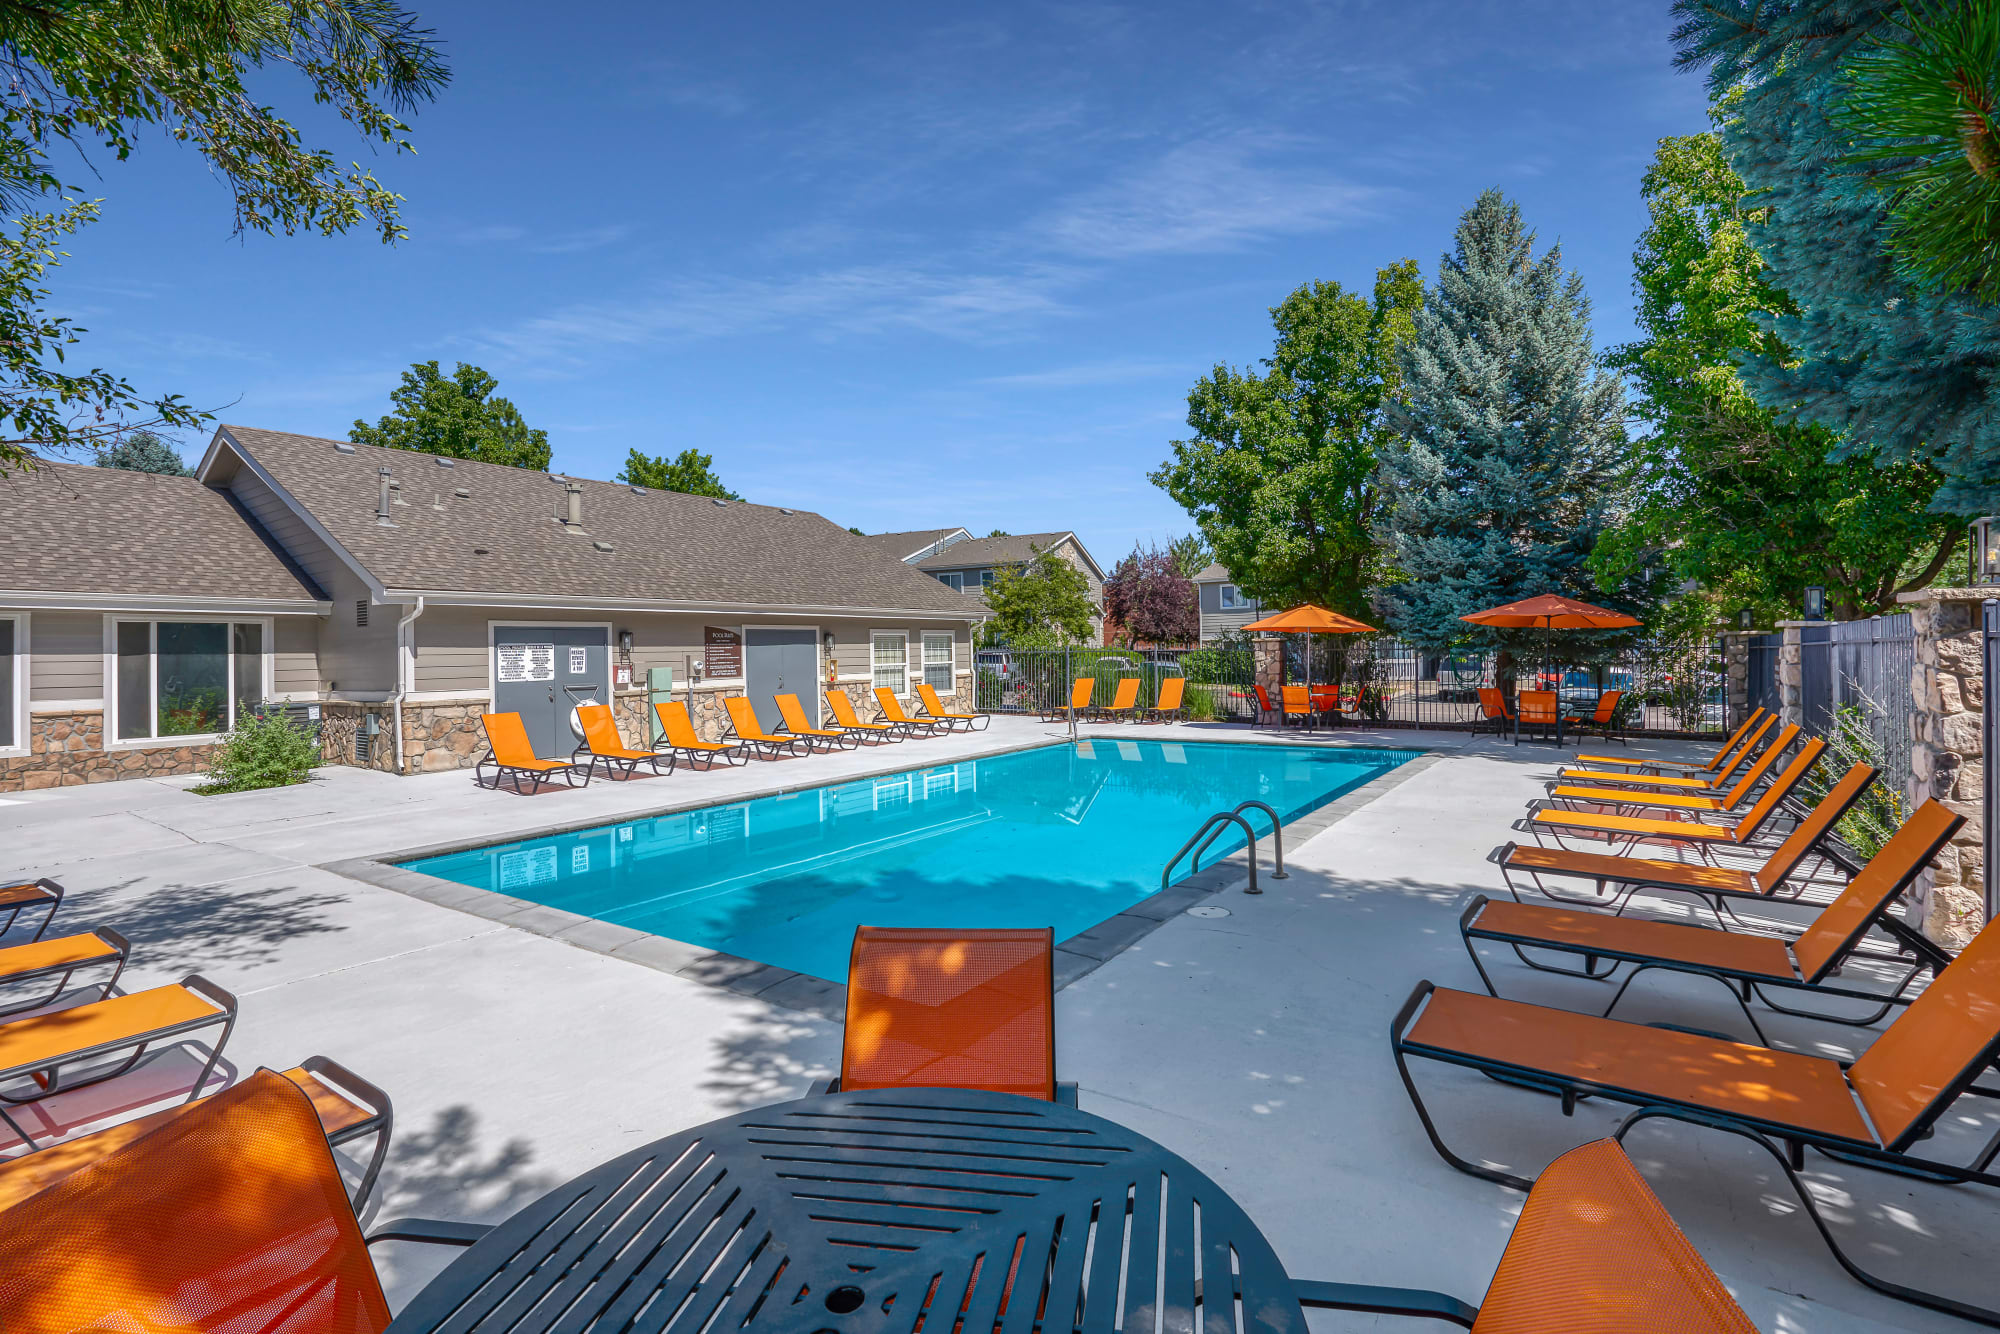 Pool with lounge chairs and umbrellas at Crossroads at City Center Apartments in Aurora, Colorado